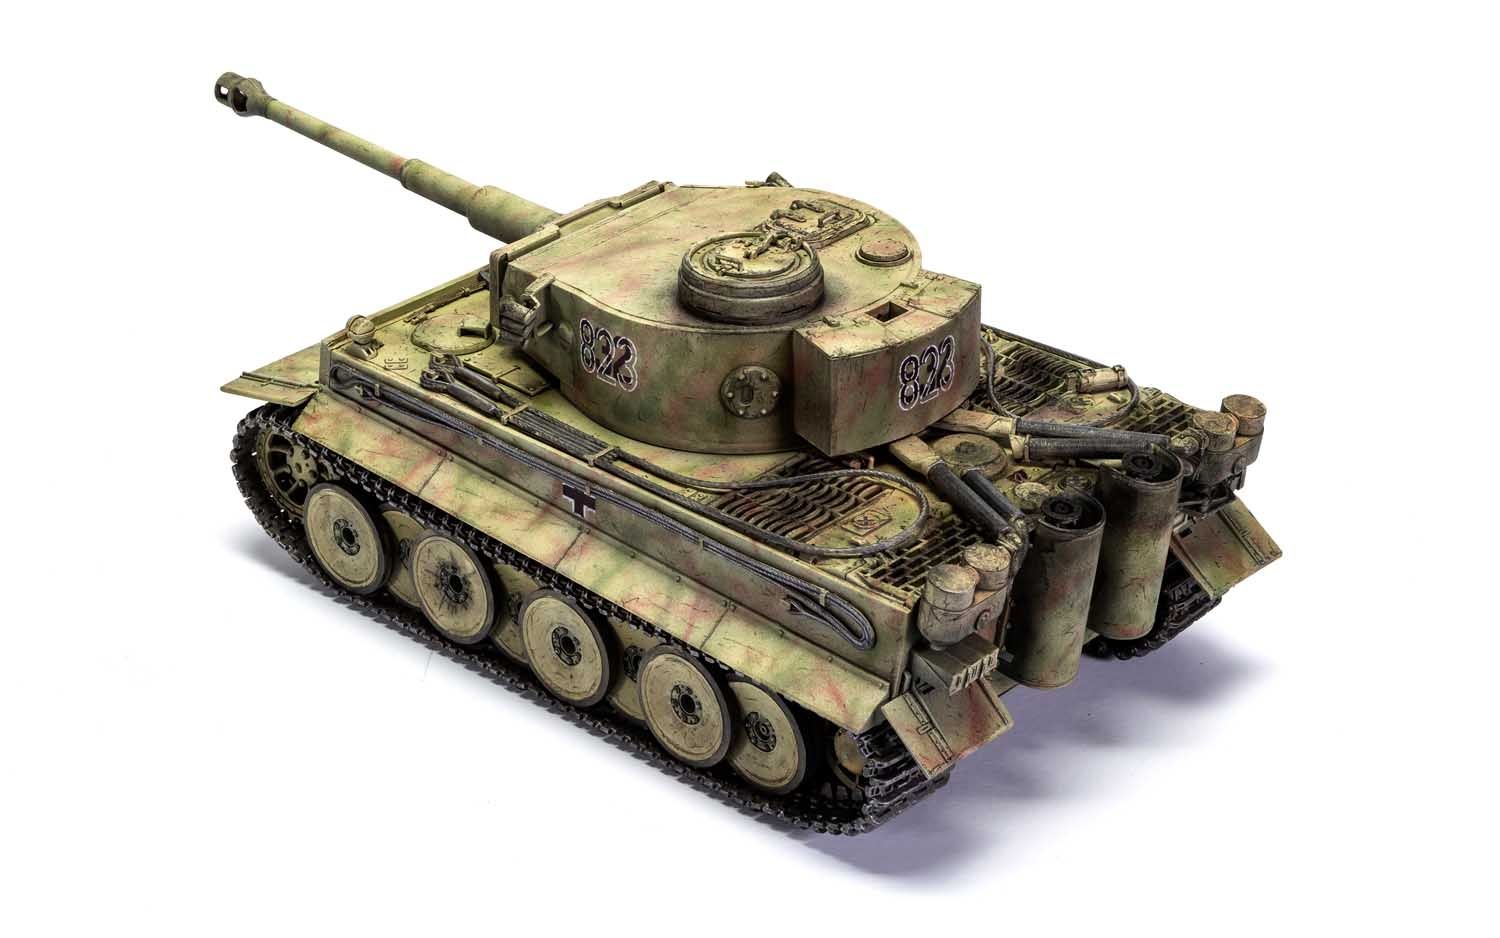 Tiger-1 "Early Version" (1:35) - Loaded Dice Barry Vale of Glamorgan CF64 3HD